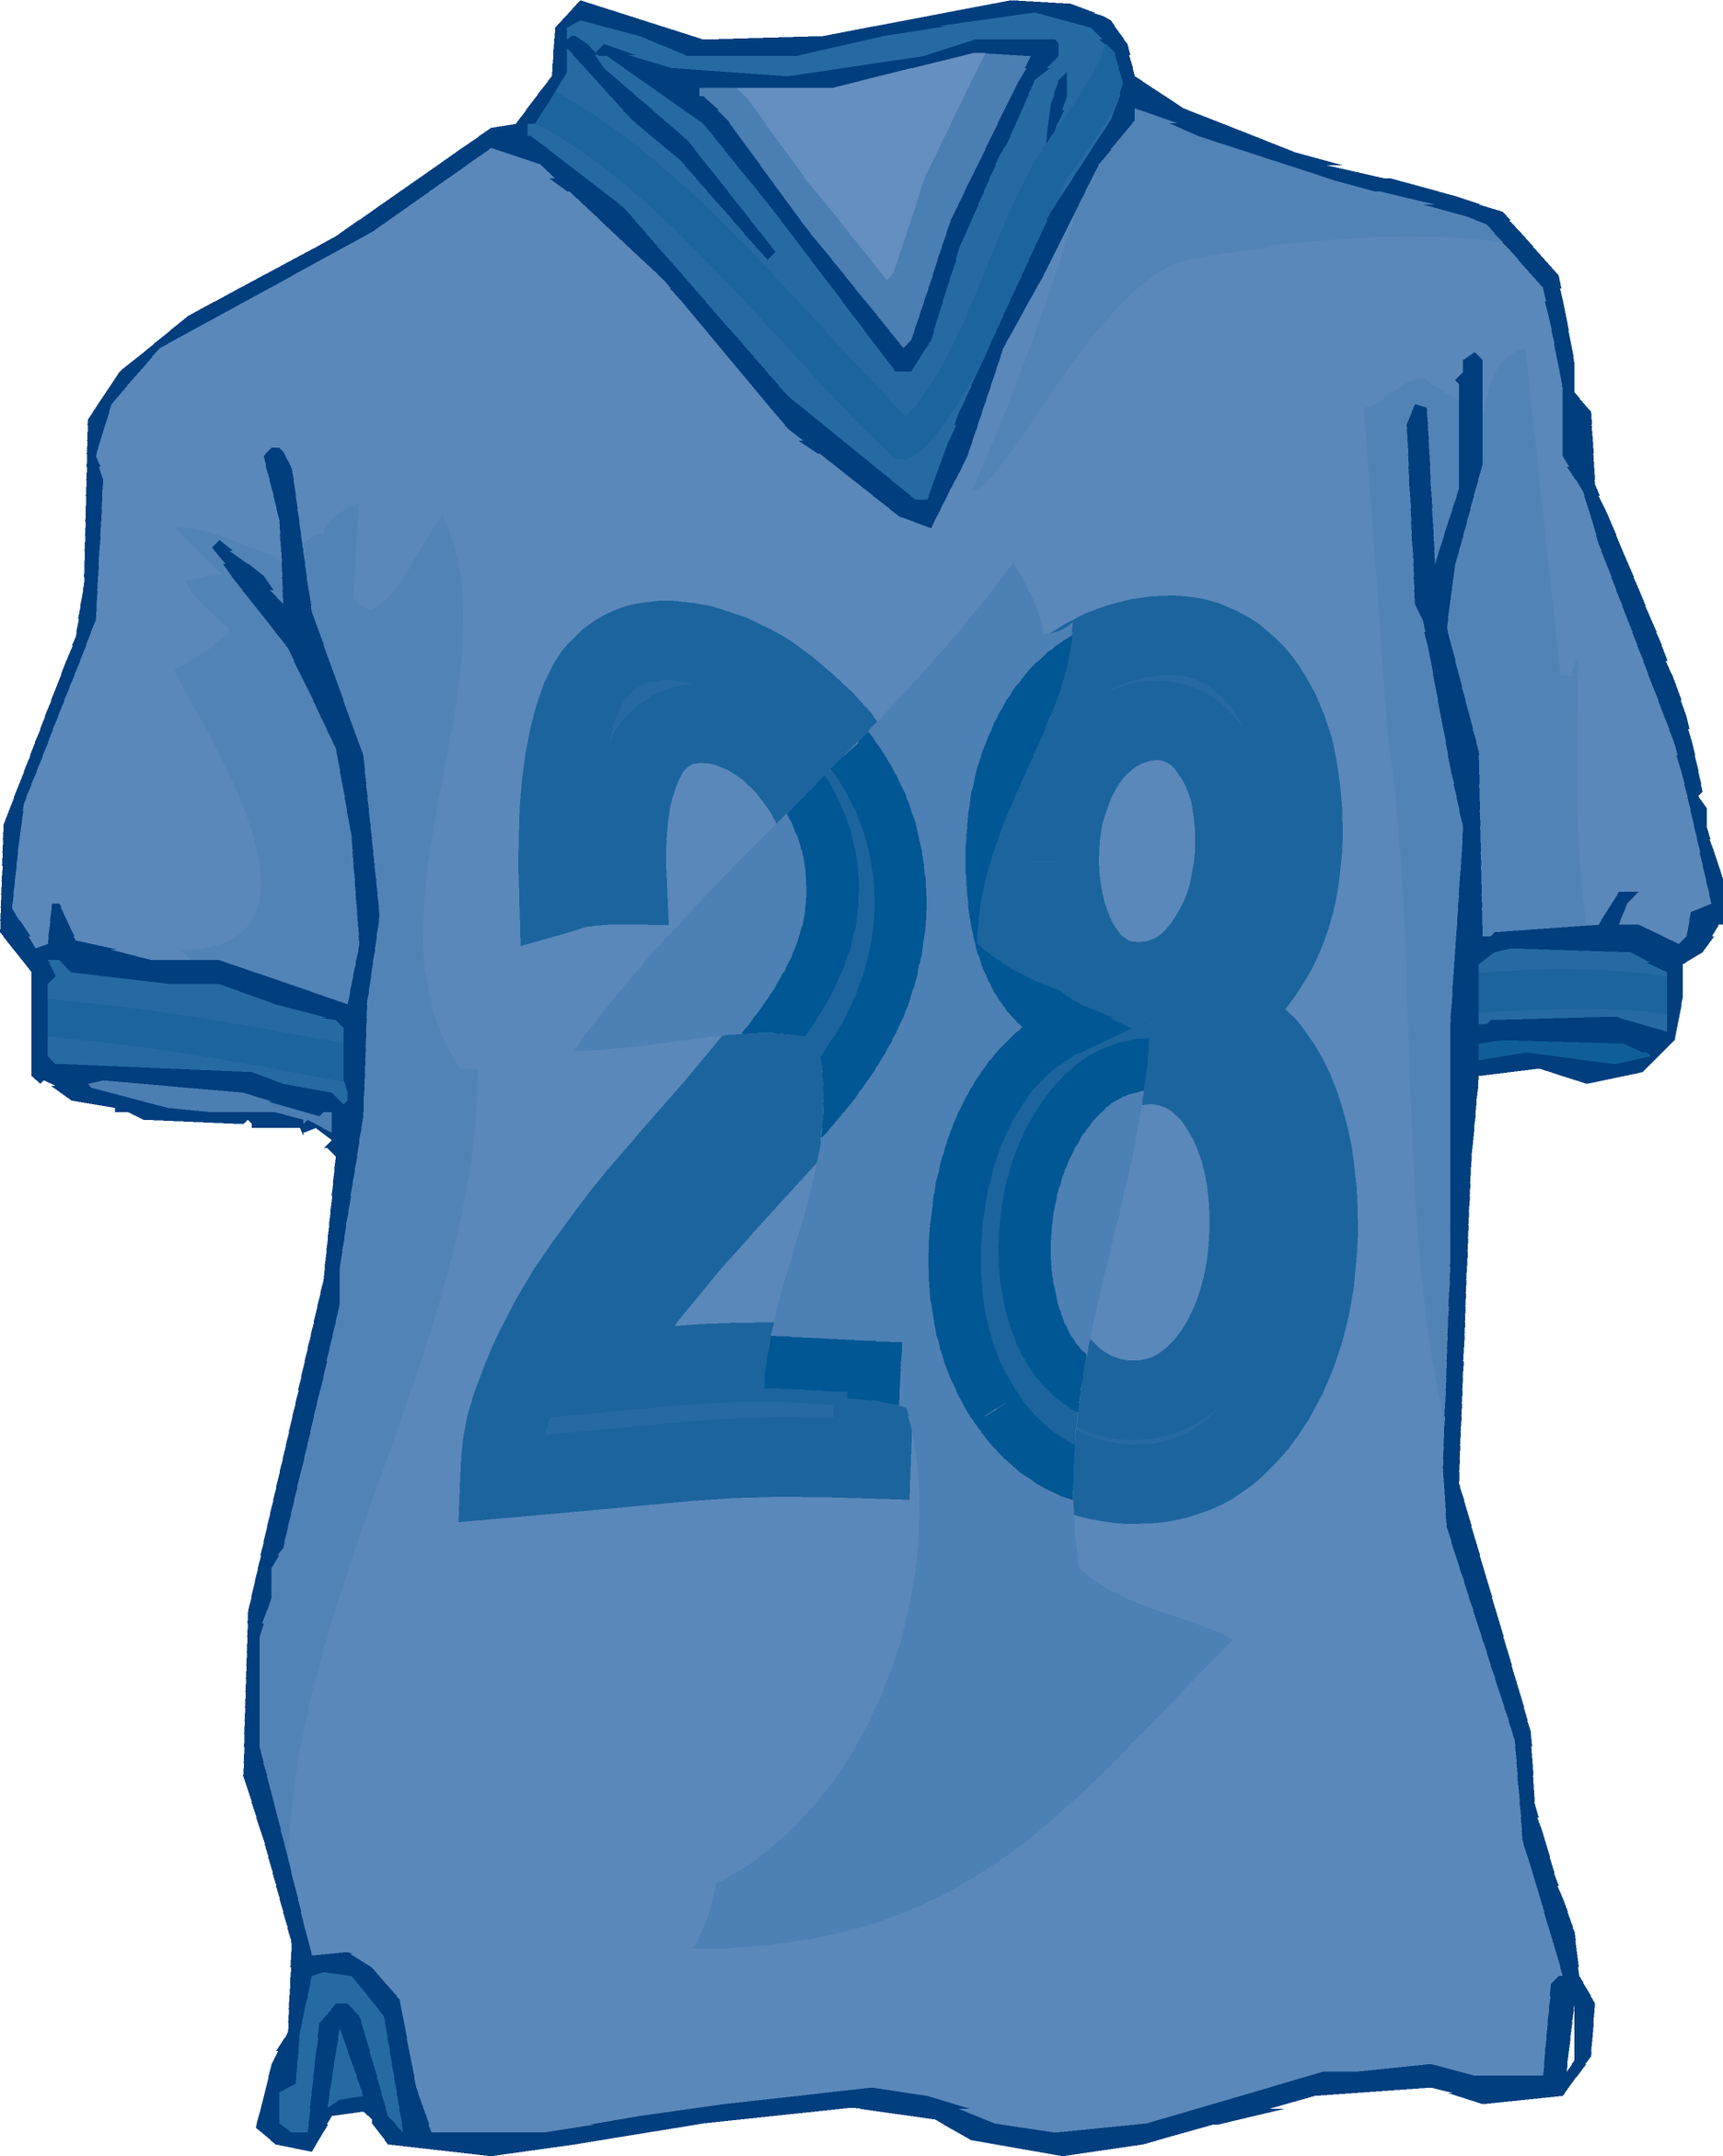 Football Jersey Clip Art Clipart - Free to use Clip Art Resource